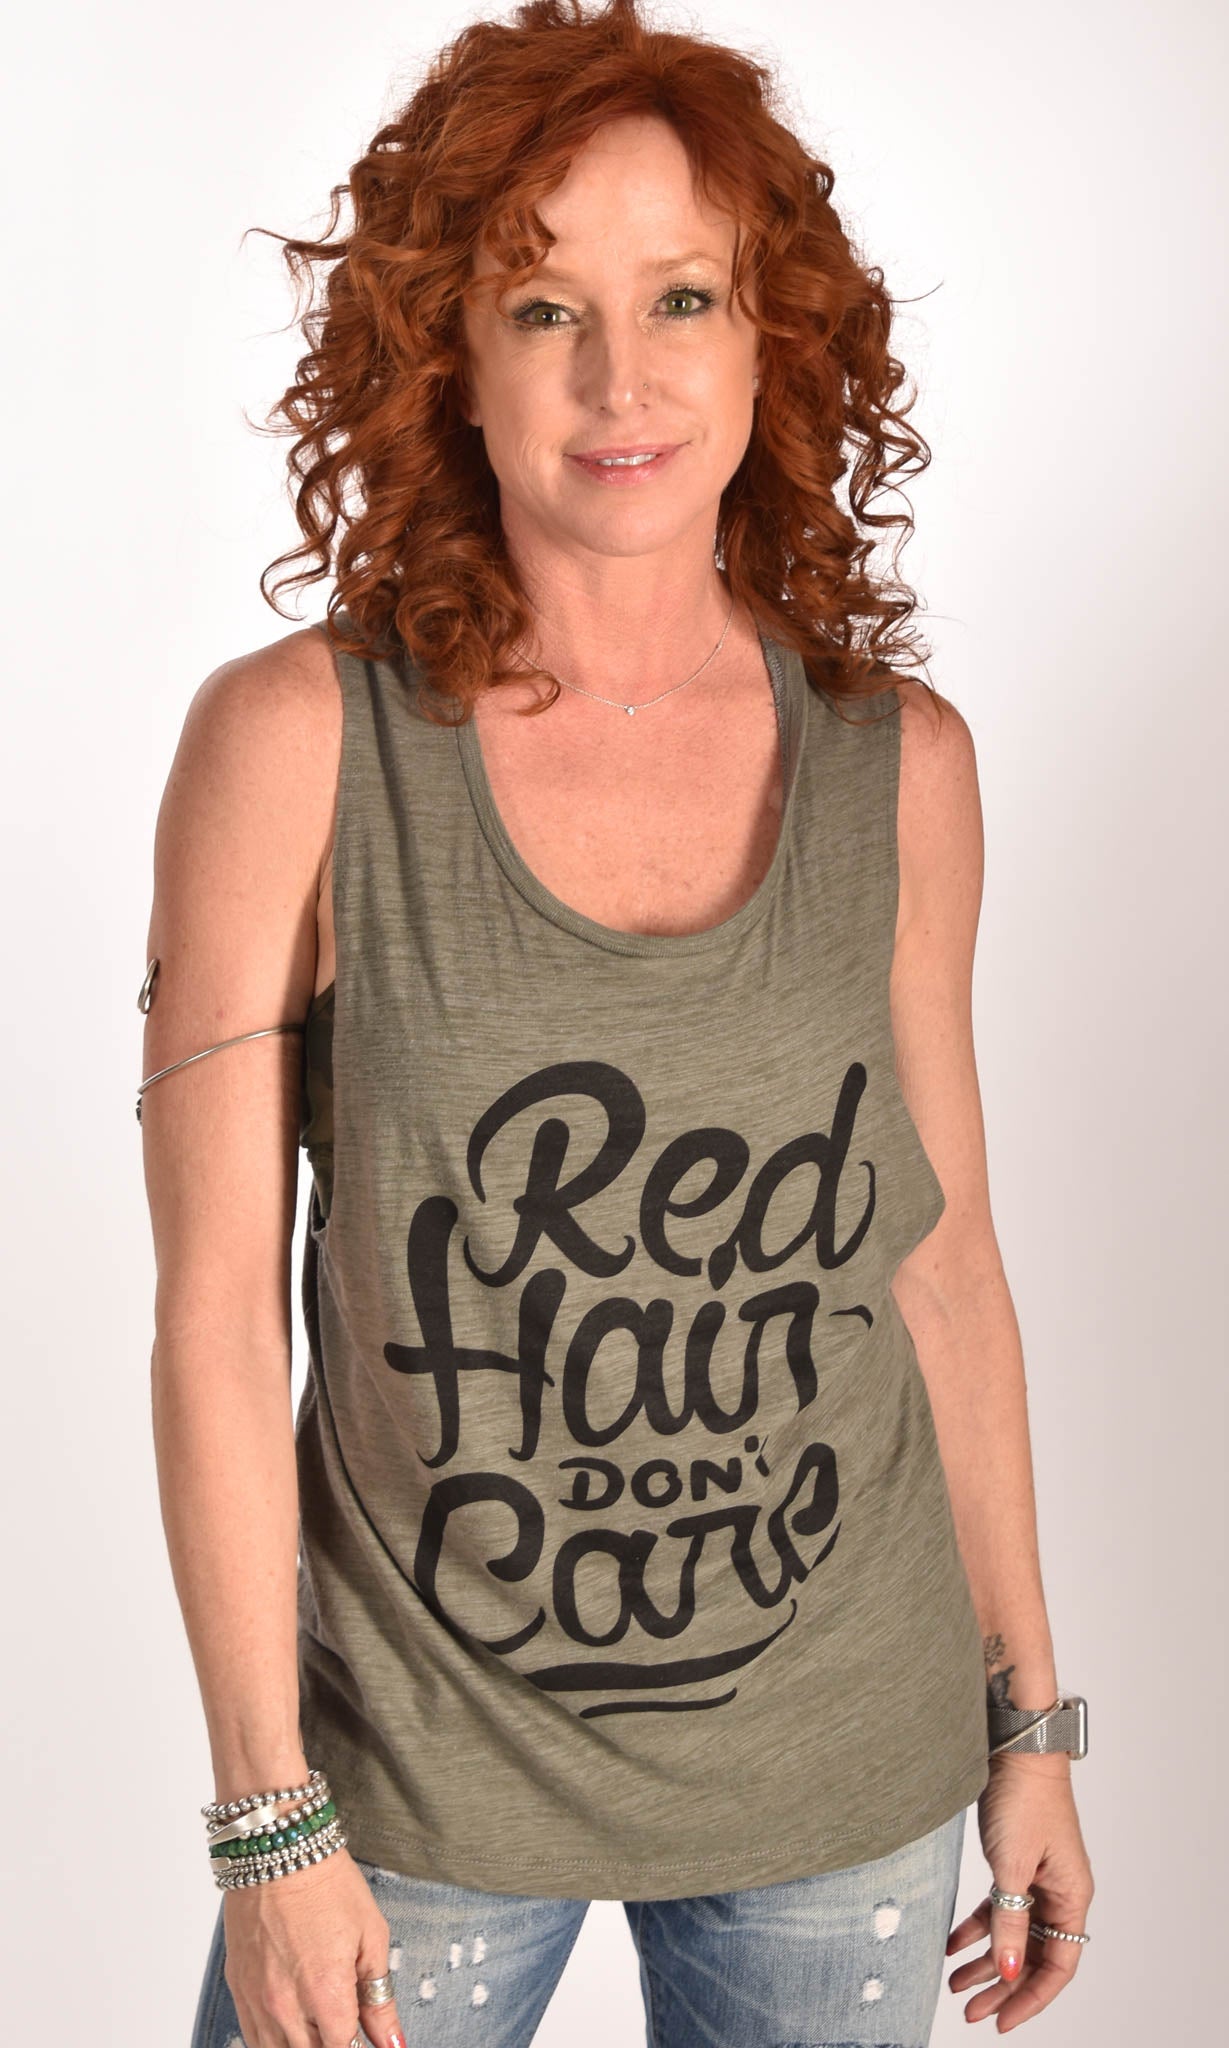 You Even Lift? Women's Flowy Scoop Muscle Tank – Medic In The Trees